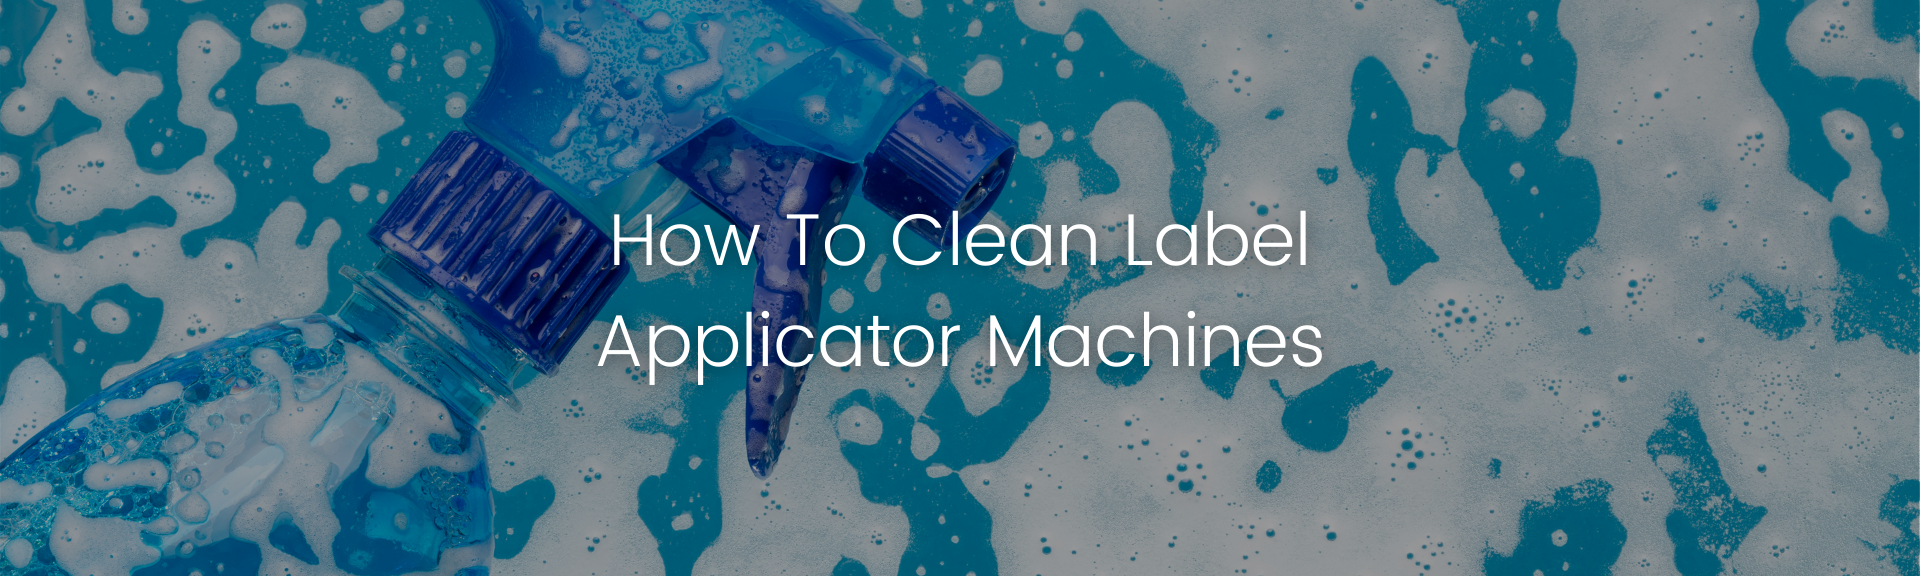 How To Clean Label Applicator Machines